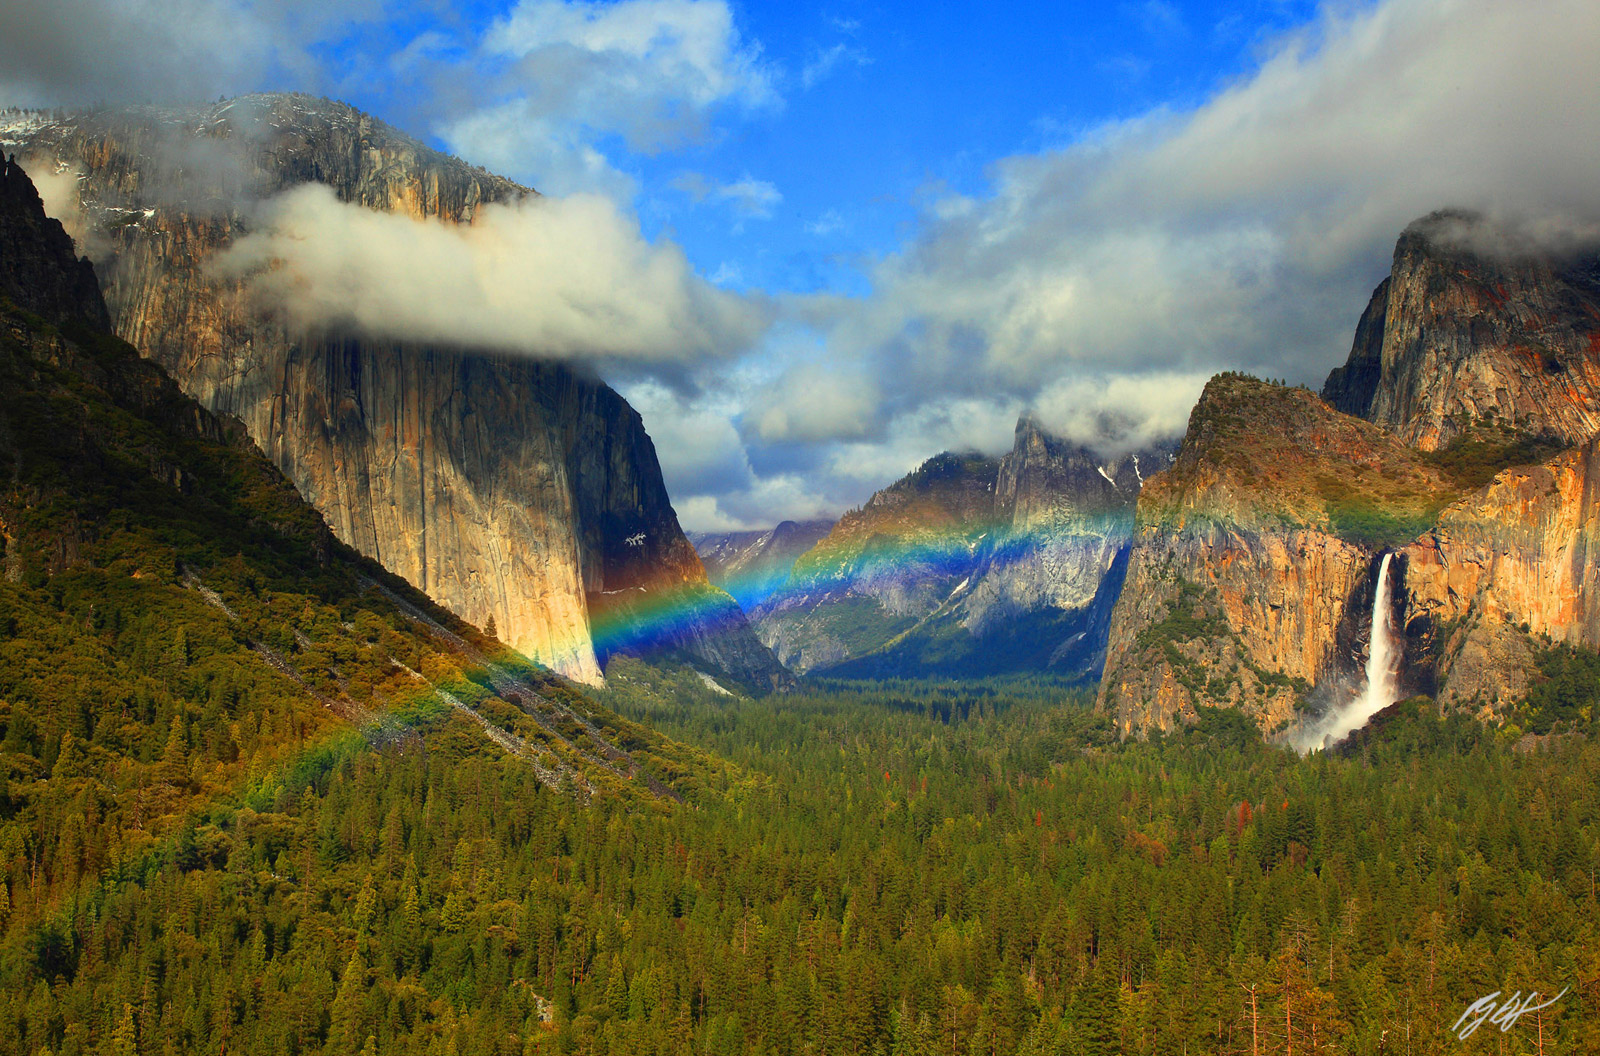 Rainbow Over Yosemite Valley from Tunnel Viewpoint, Yosemite National Park in California